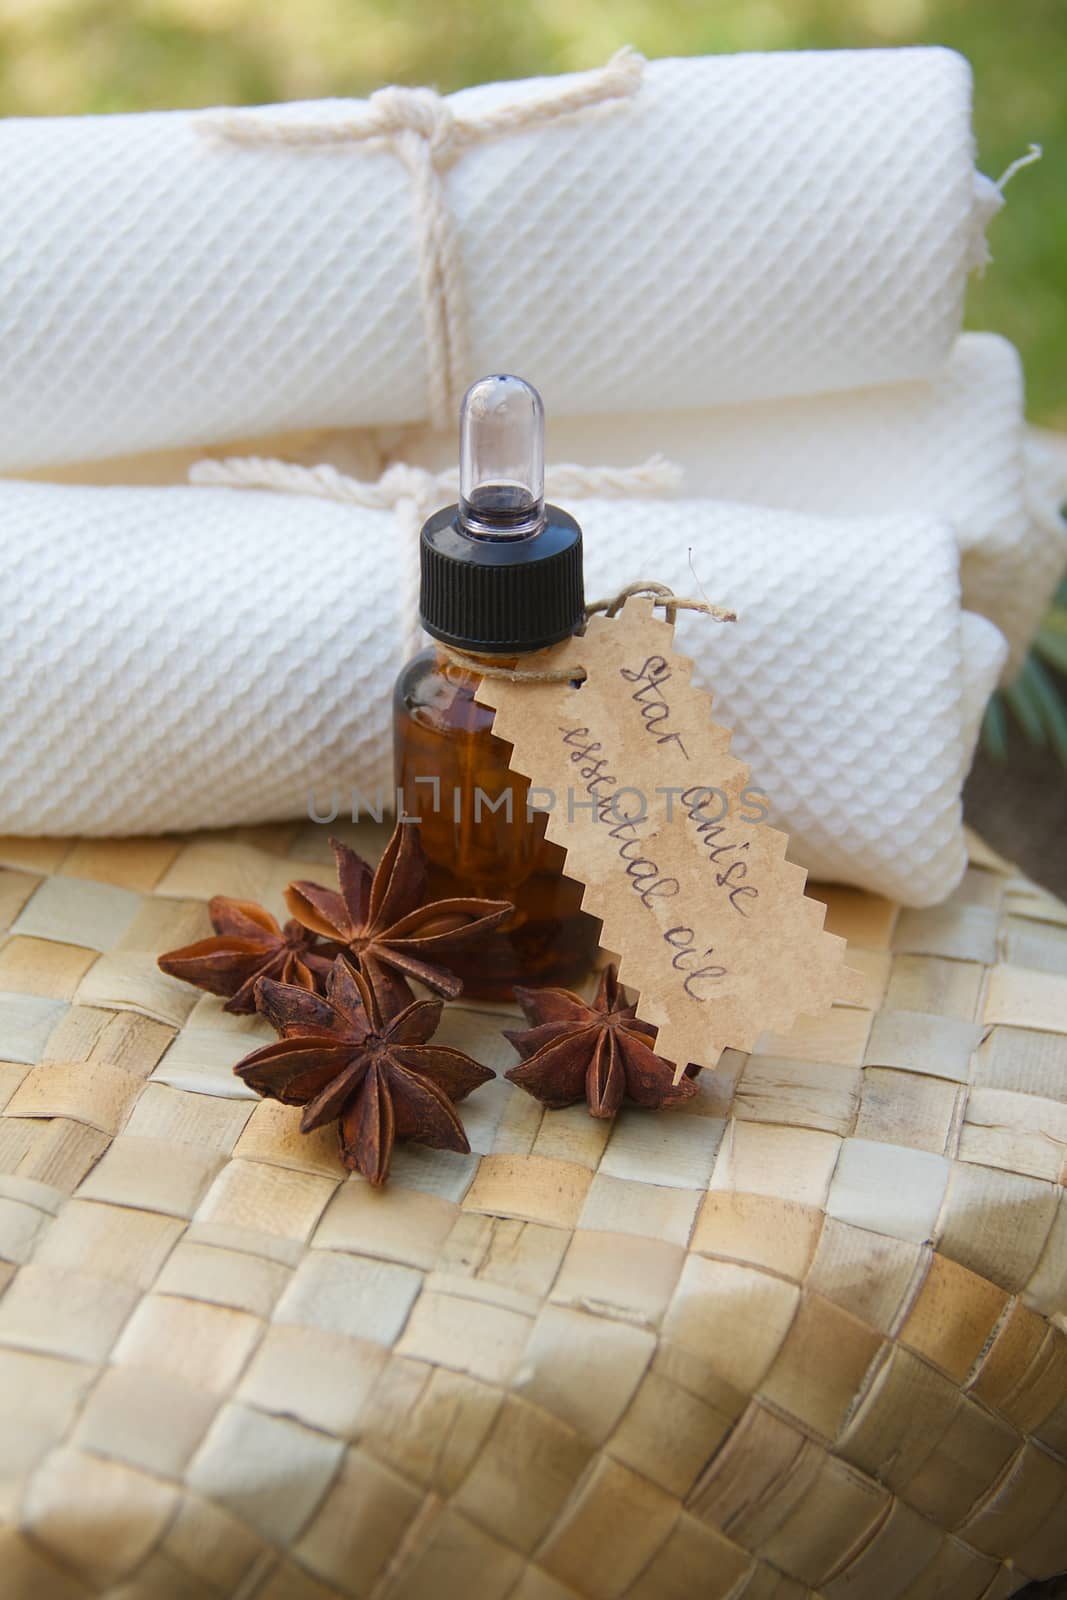 A bottle of star anise essential oil on the woven surface